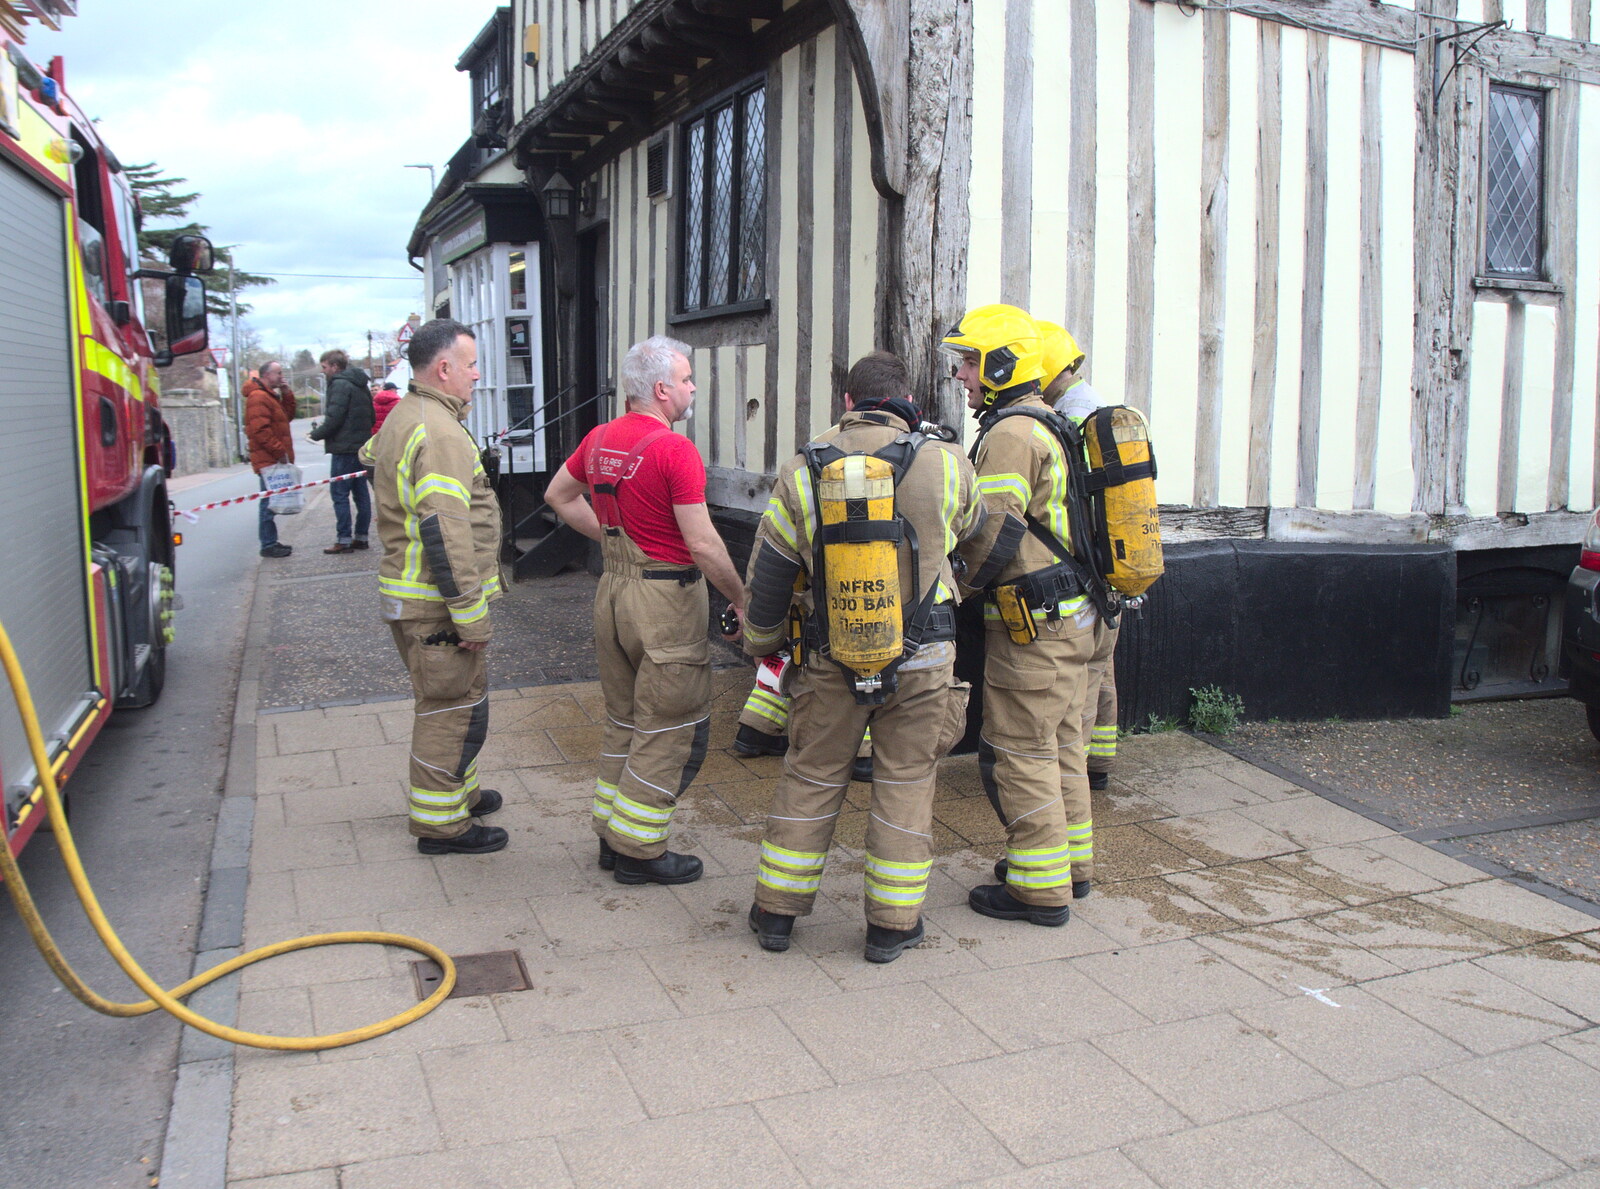 Firemen mill around and survey the scene from Dolphin House Fire and an Escape Room, Diss and Norwich - 26th March 2023